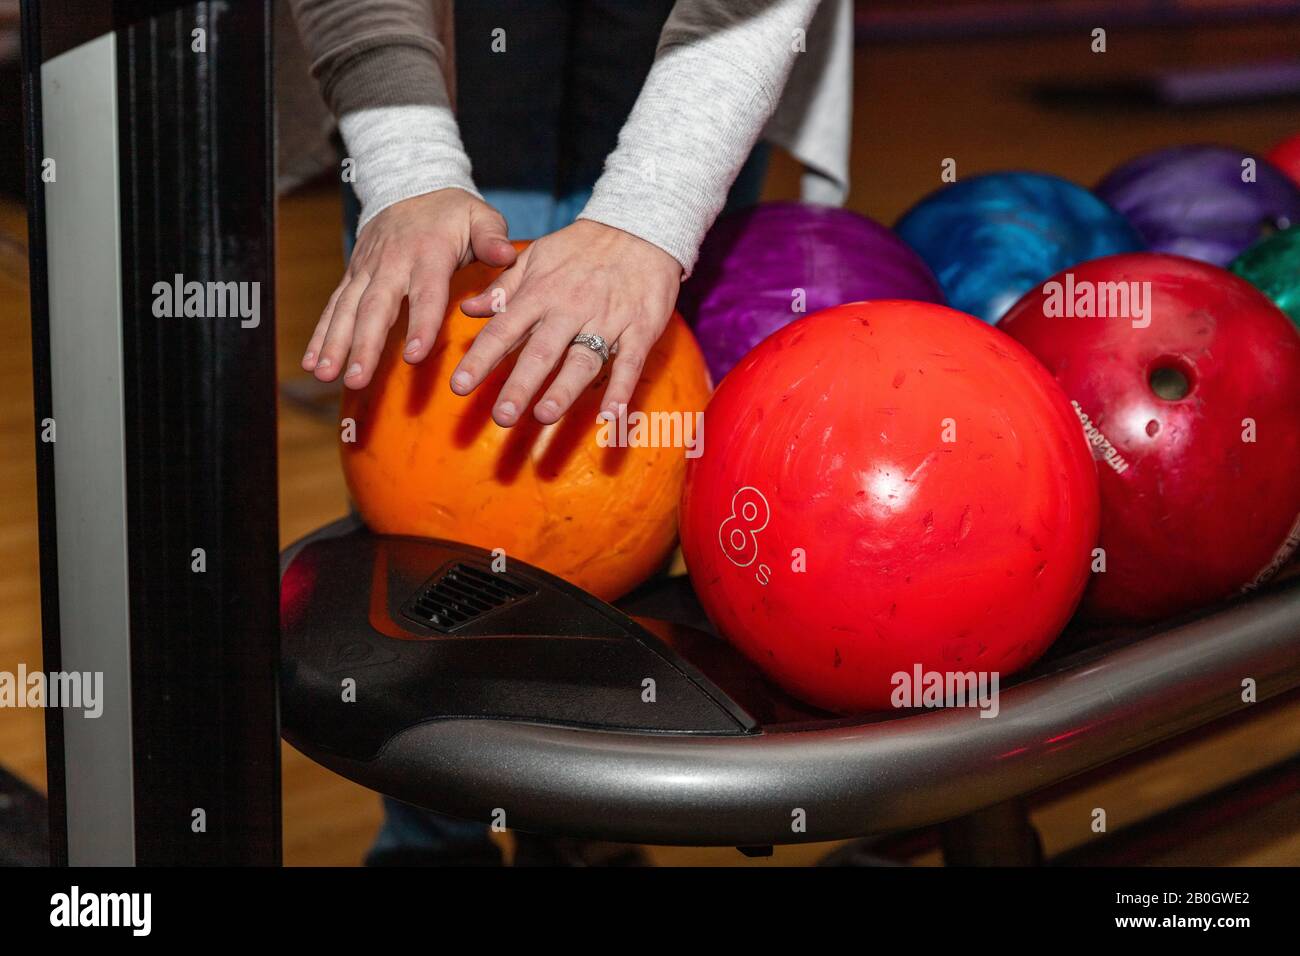 Bowler drying hands in front of bowling balls Stock Photo